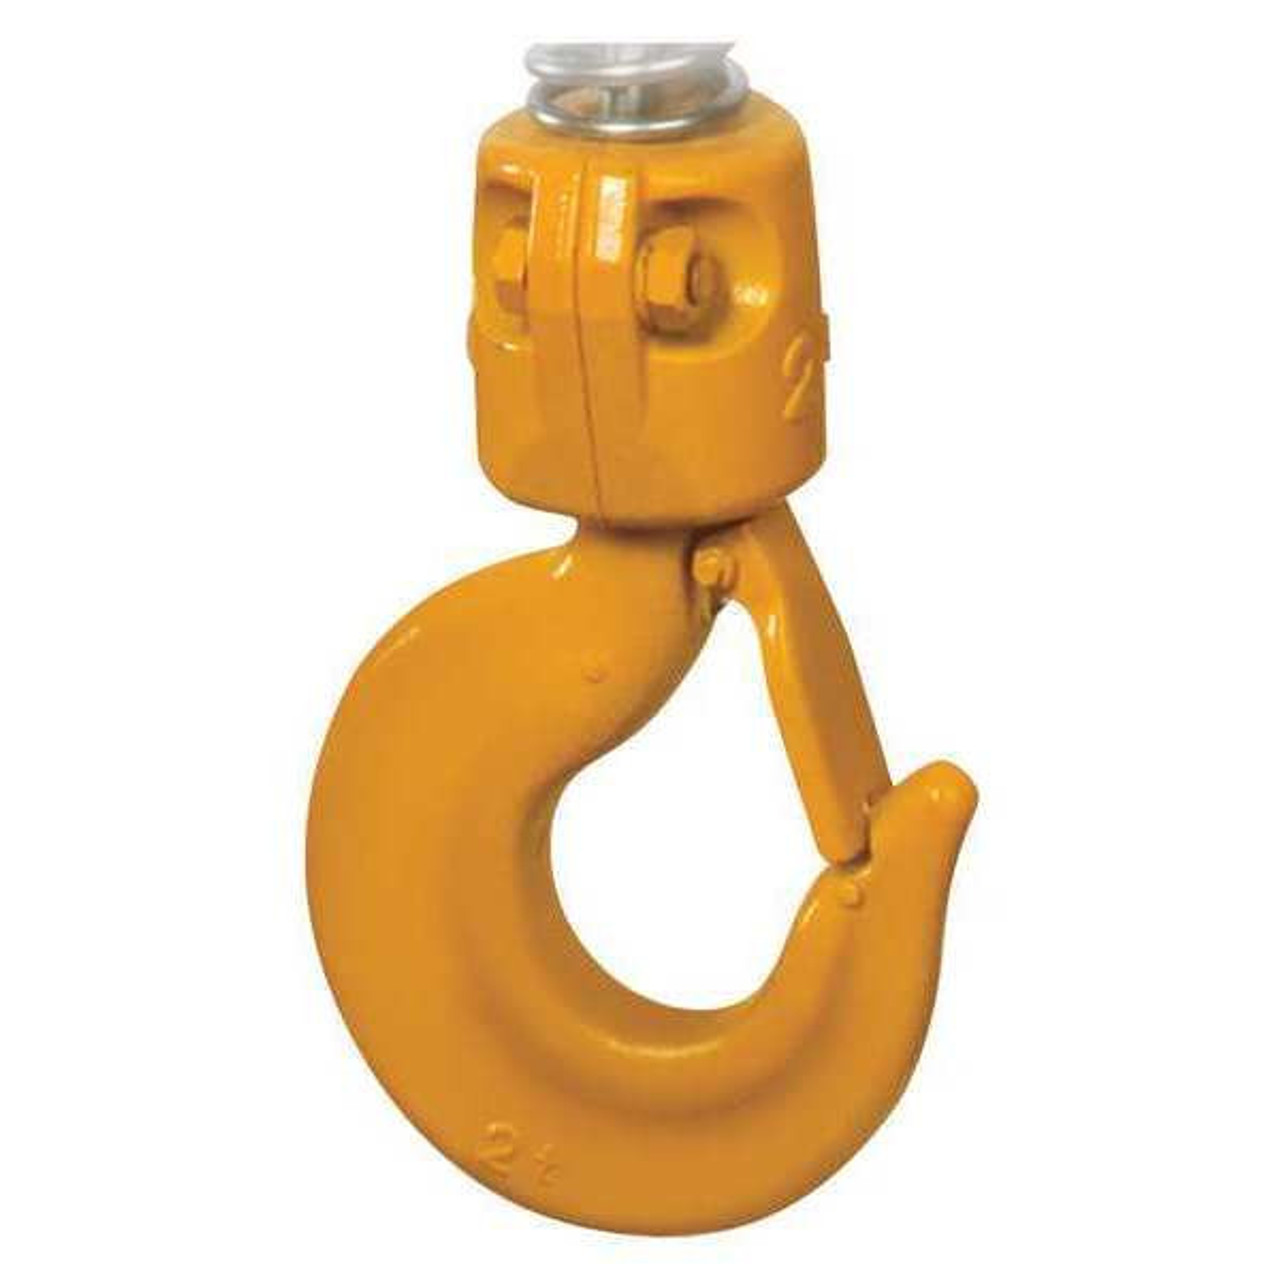 Bottom Hook Assembly, Product Type Bottom Hook Assembly, Compatible Hoist Type Electric Chain Hoists, Compatible Load Capacity 20,000 lb, Compatible Series ER2, NER2, Material Carbon Steel, Overall Length Not Applicable, Overall Width 11.4 in, Overall Height Not Applicable, Includes Safety Latch